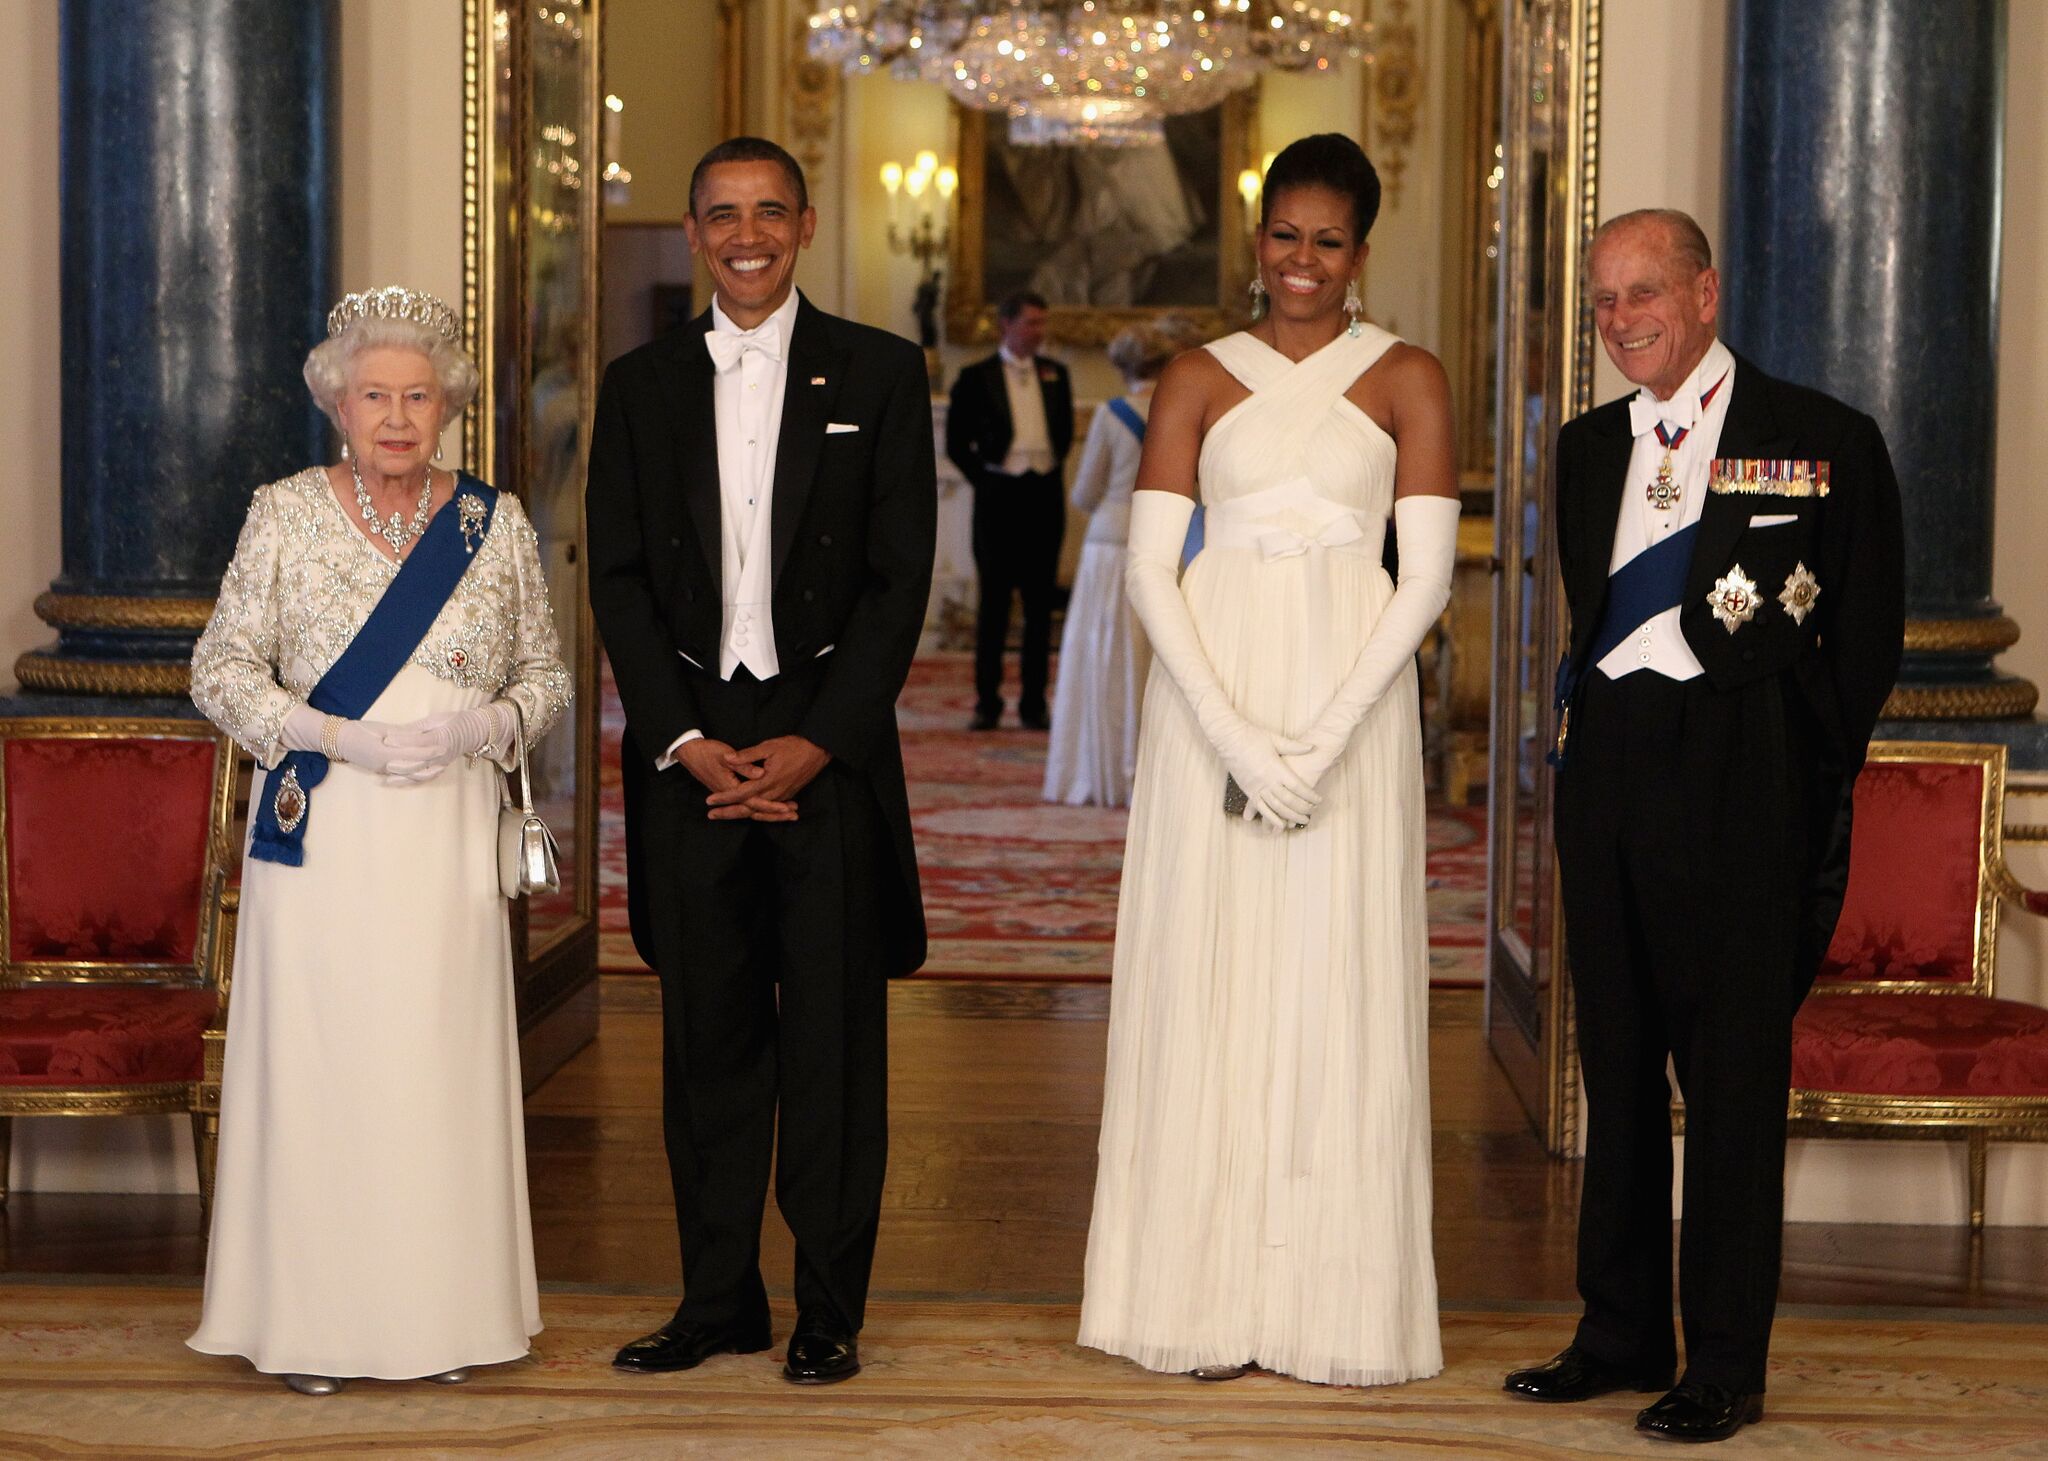  Queen Elizabeth II poses with U.S. President Barack Obama, his wife Michelle Obama and Prince Philip, Duke of Edinburgh in the Music Room of Buckingham Palace  | Getty Images